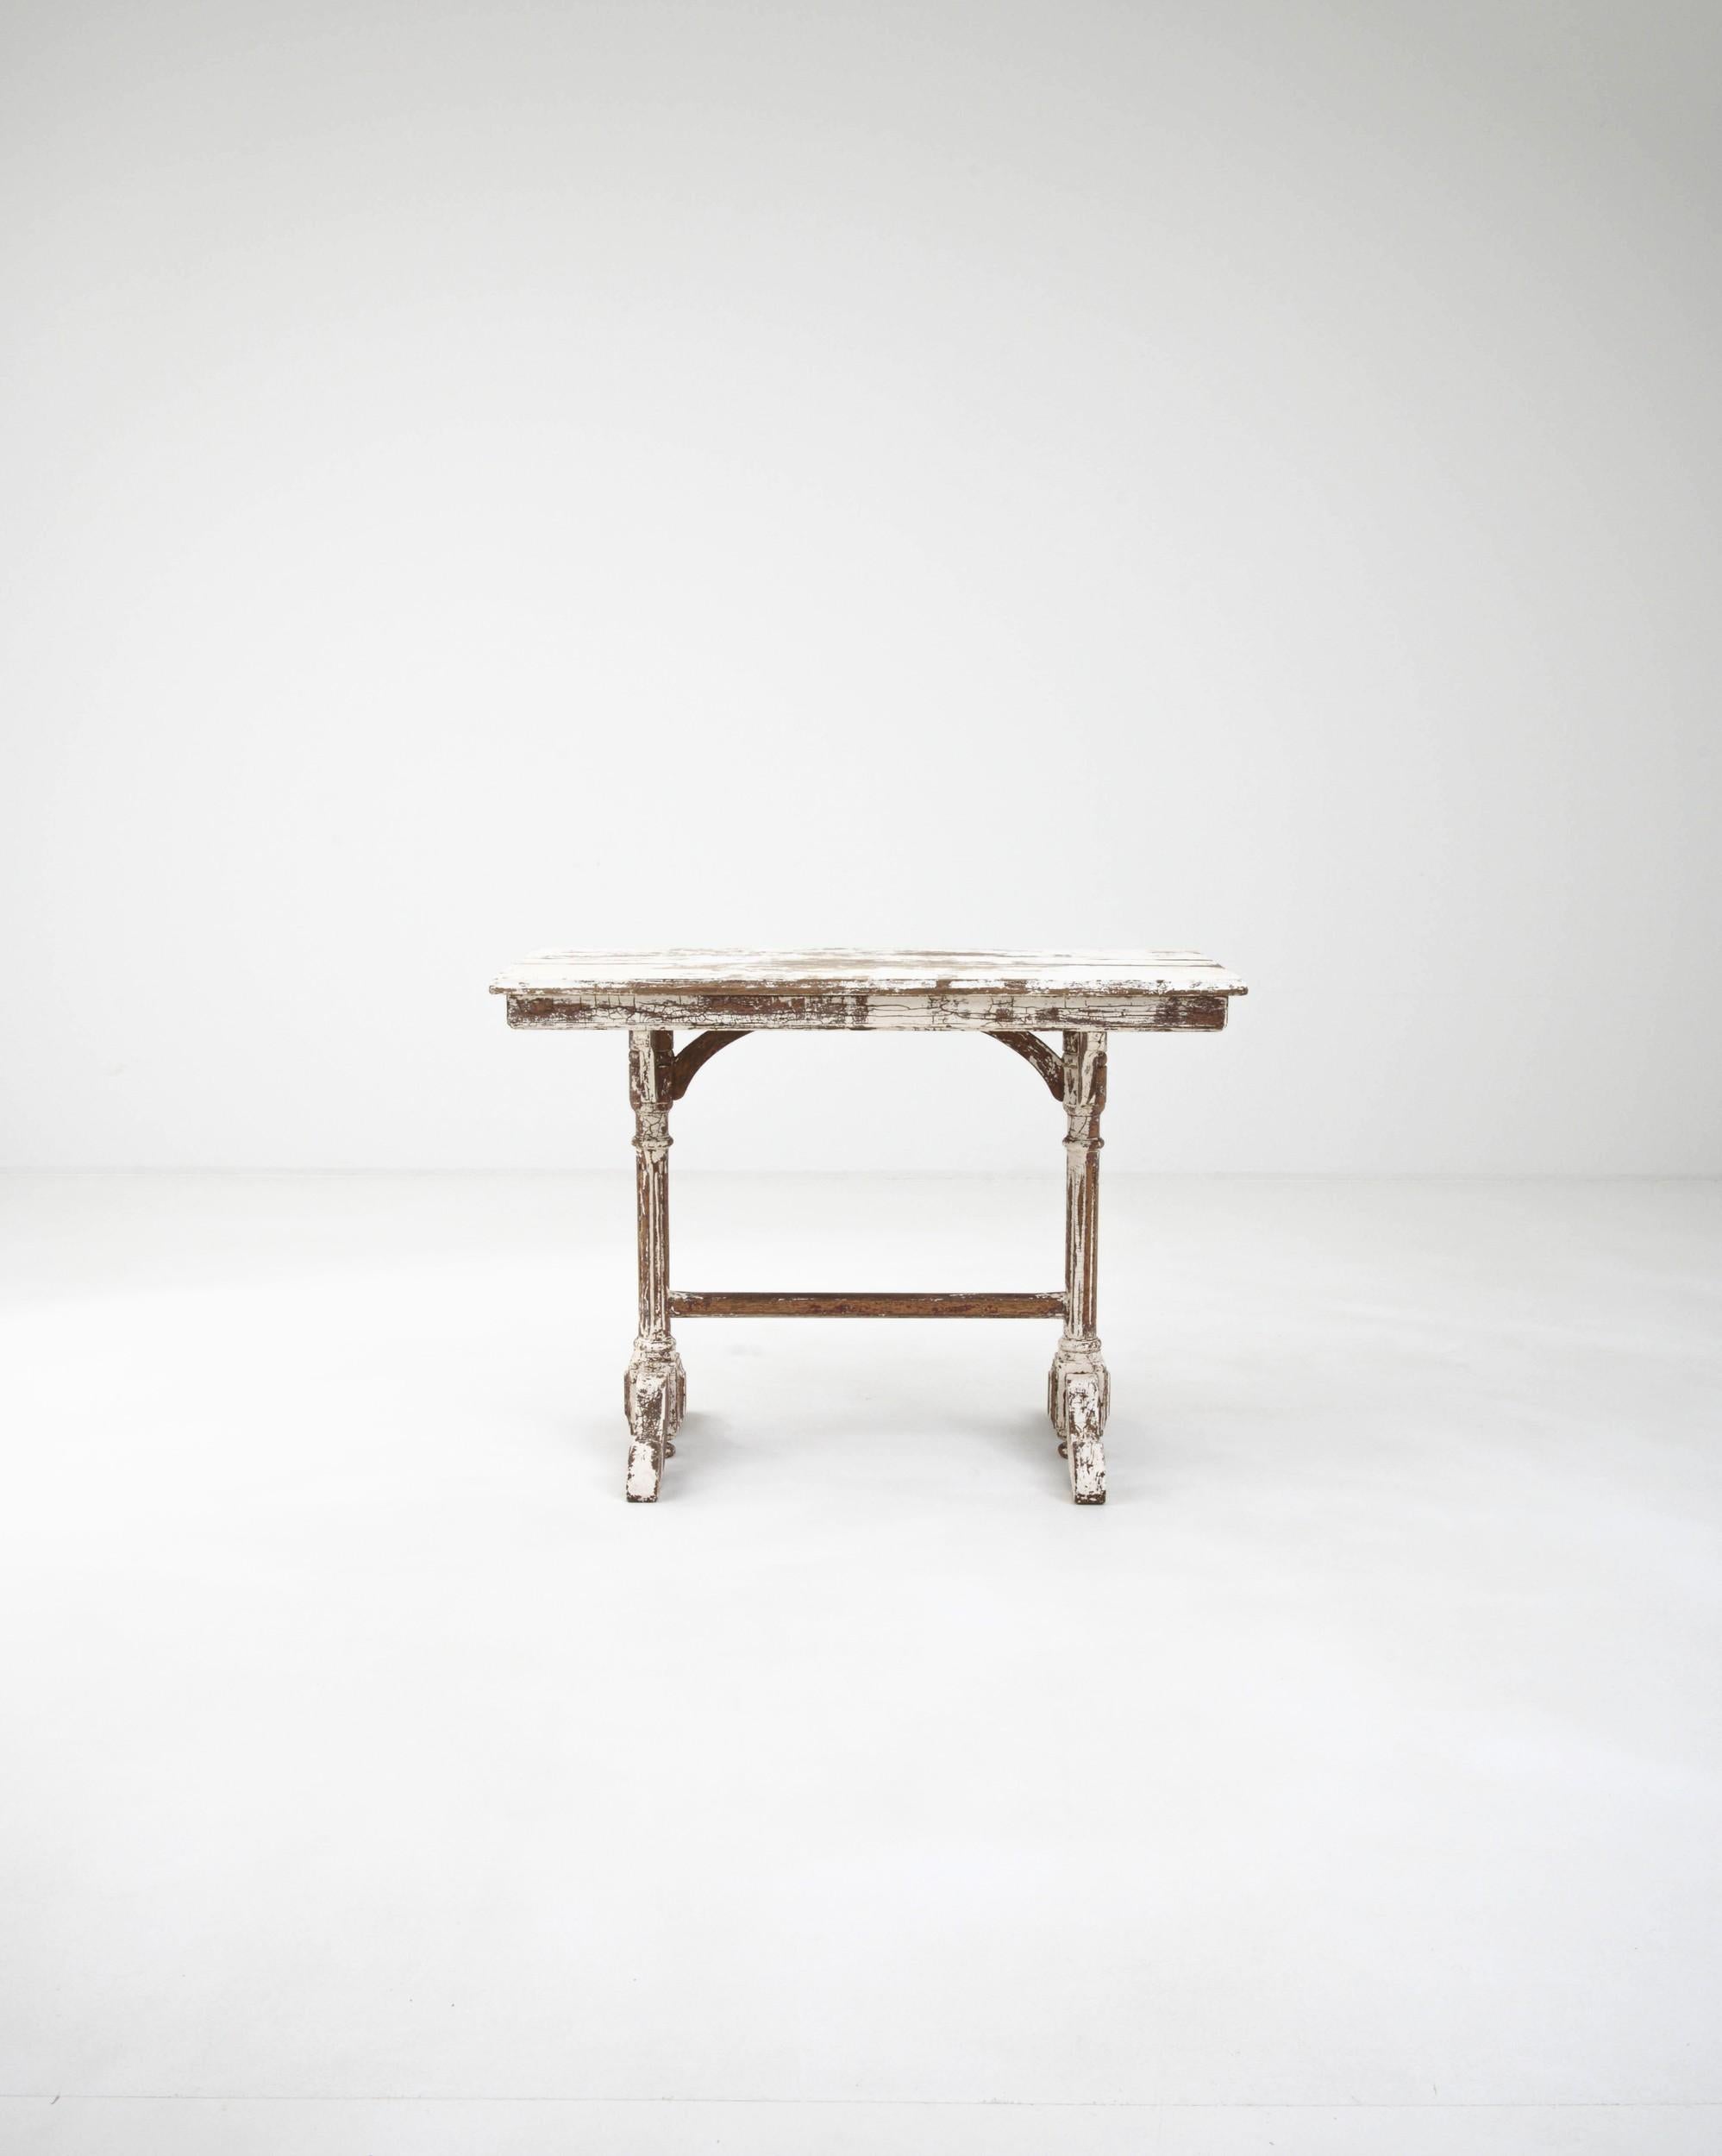 Elegant and nostalgic, this antique wooden side table evokes the nostalgia of a bygone age. Built in France in the 1800s, a rectangular tabletop sits atop a light and graceful trestle base. The slender columns of the legs are counterbalanced by the